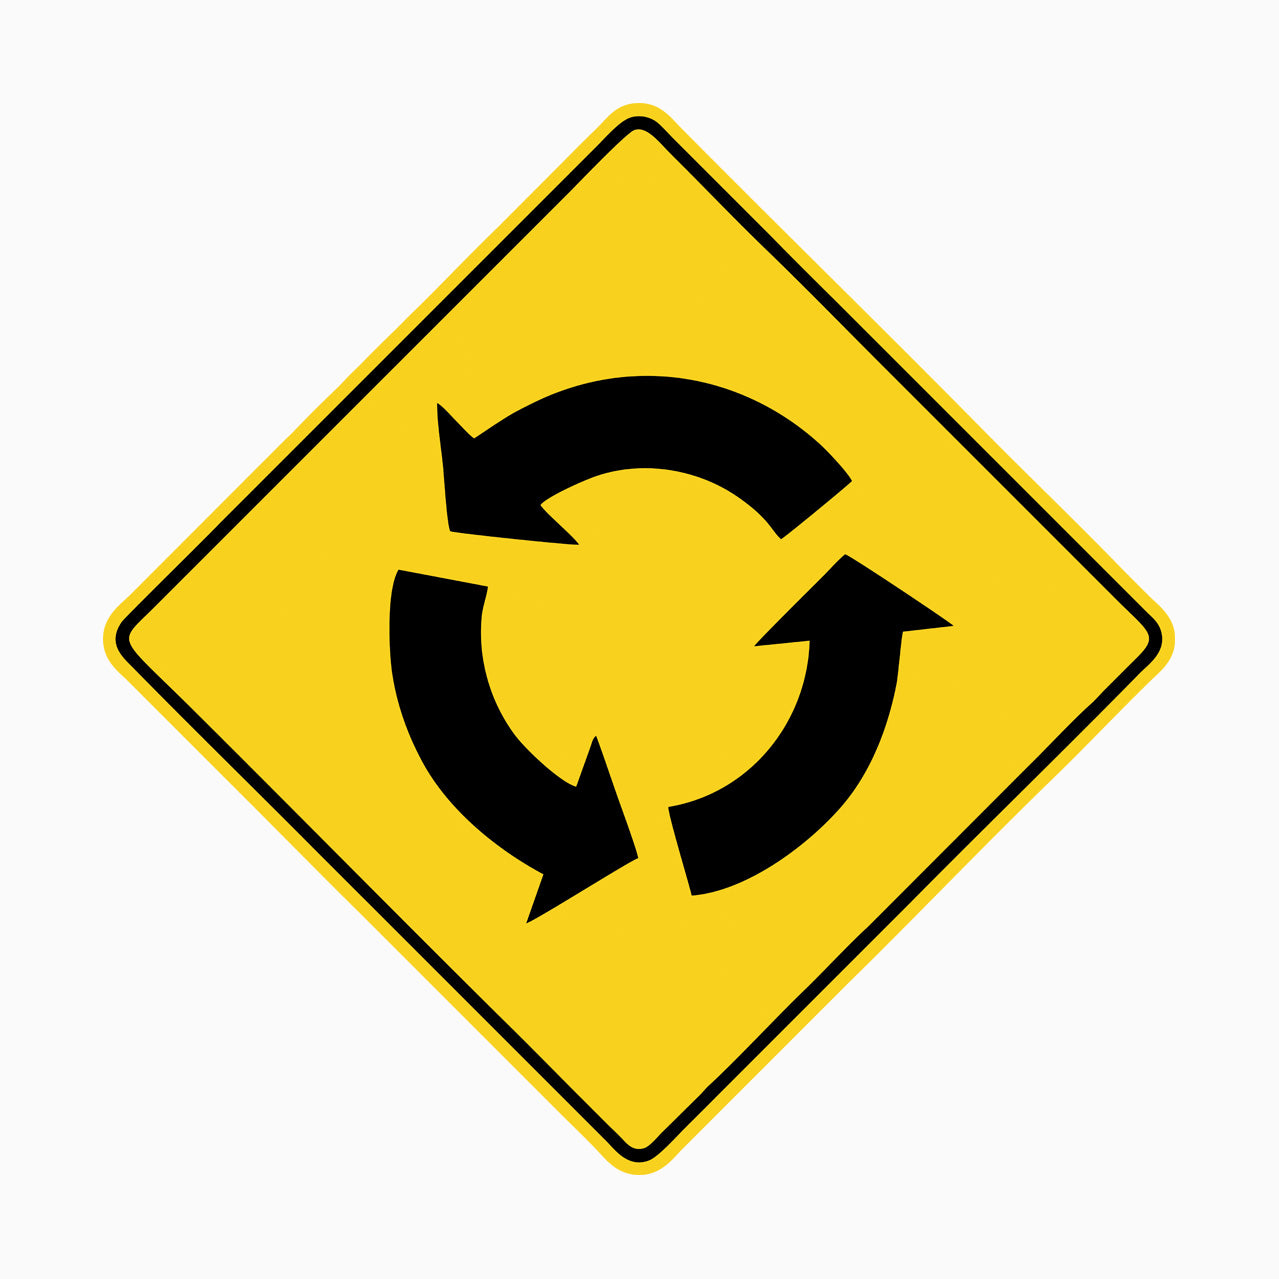 ROUNDABOUT AHEAD (TRAFFIC SIGN) W2-7(B)